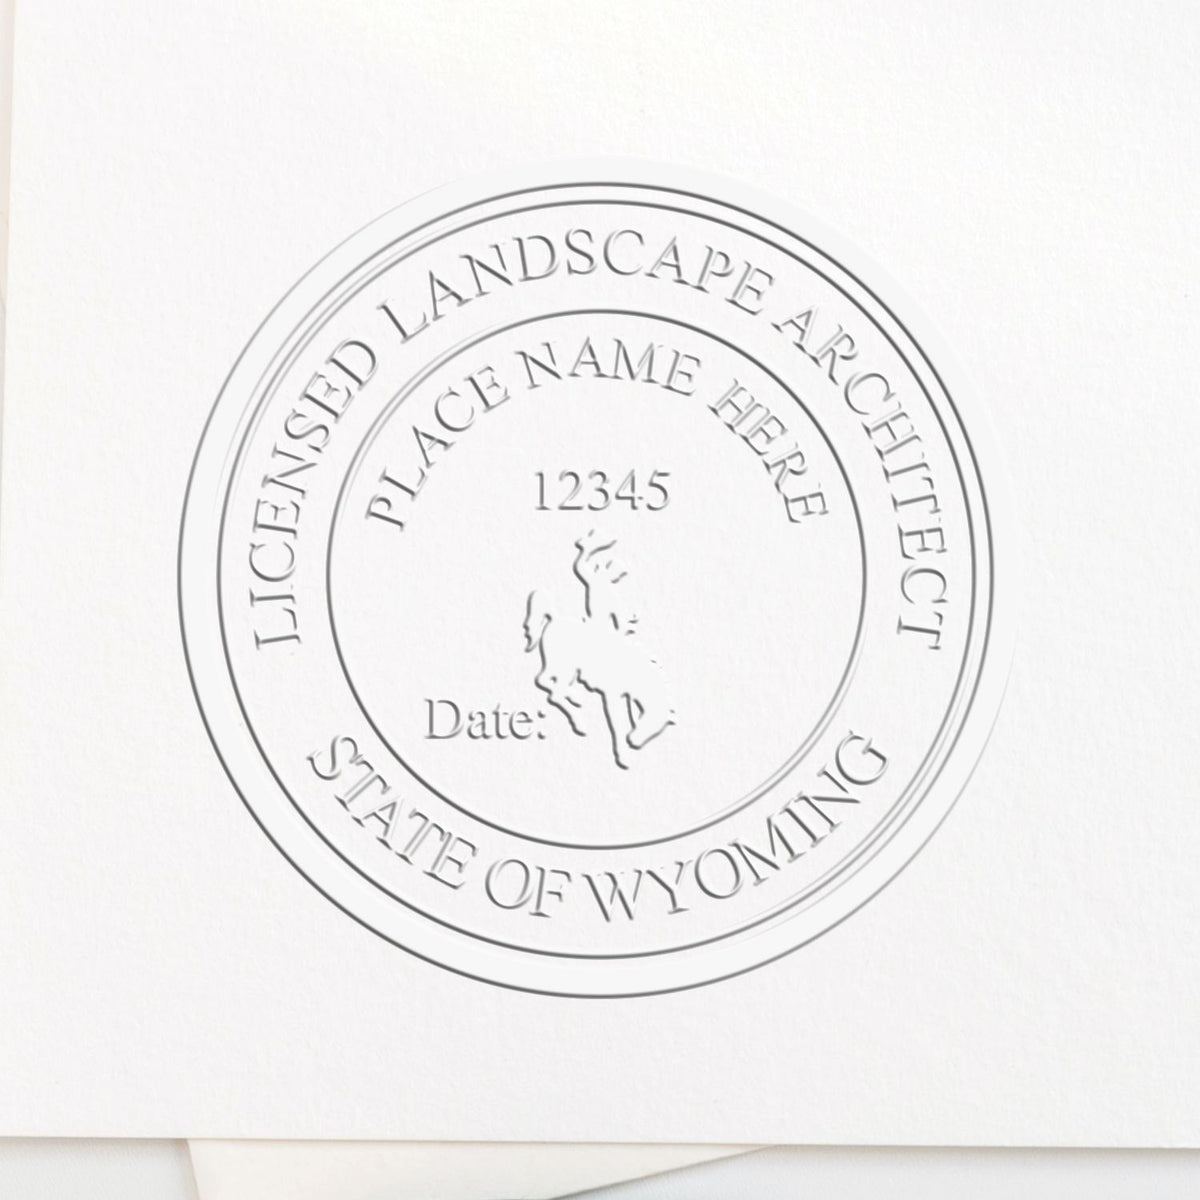 The Soft Pocket Wyoming Landscape Architect Embosser stamp impression comes to life with a crisp, detailed photo on paper - showcasing true professional quality.